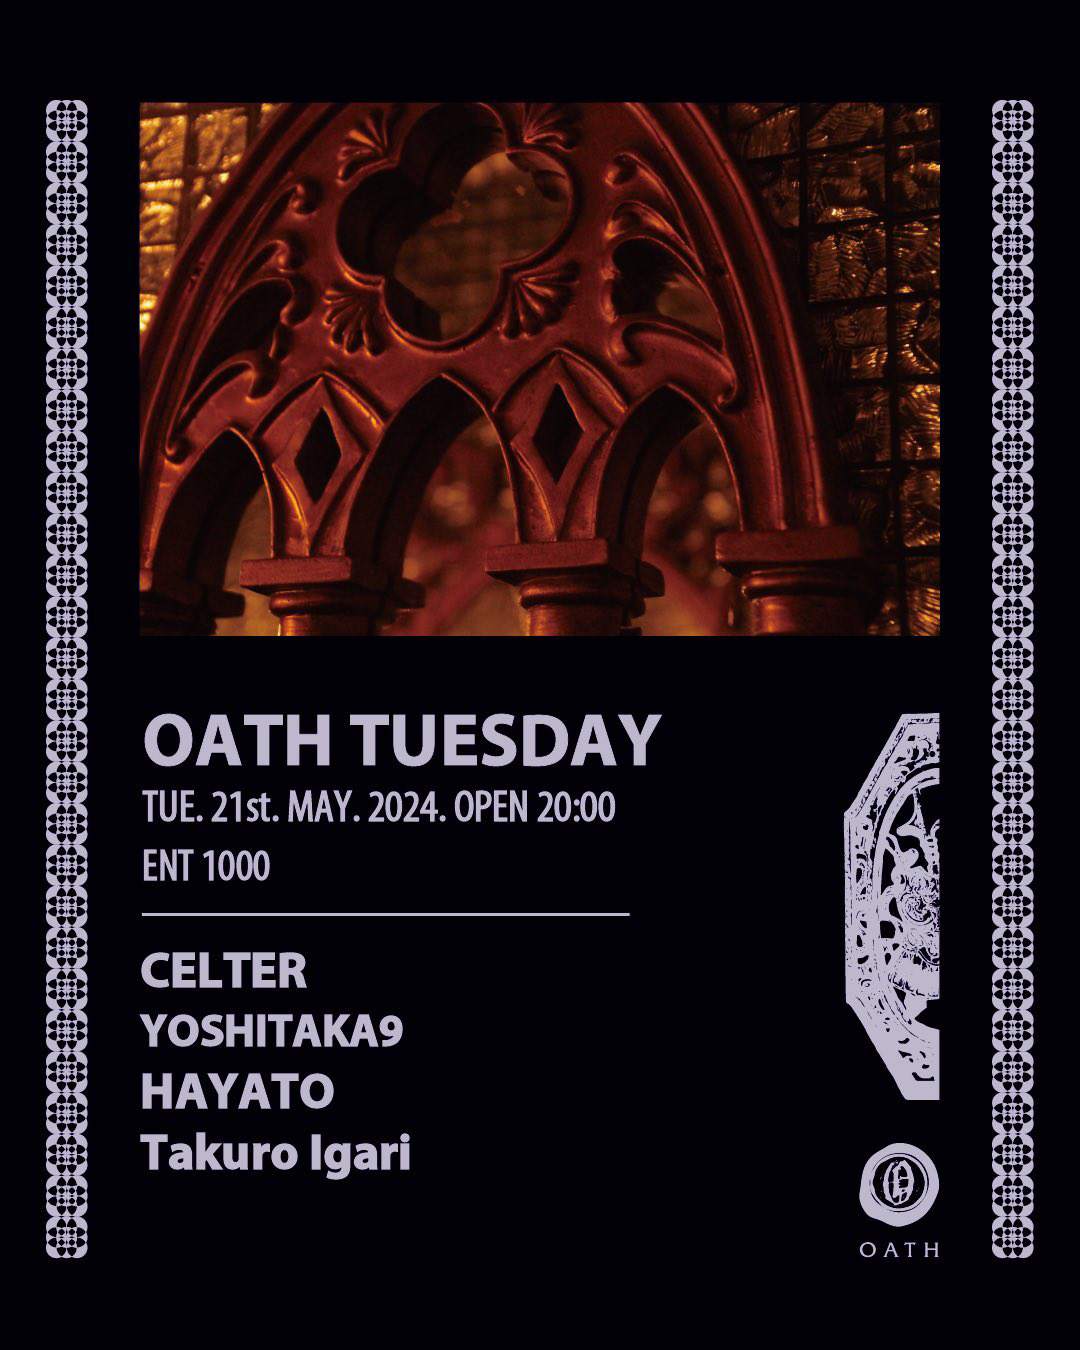 Oath TUESDAY - フライヤー表